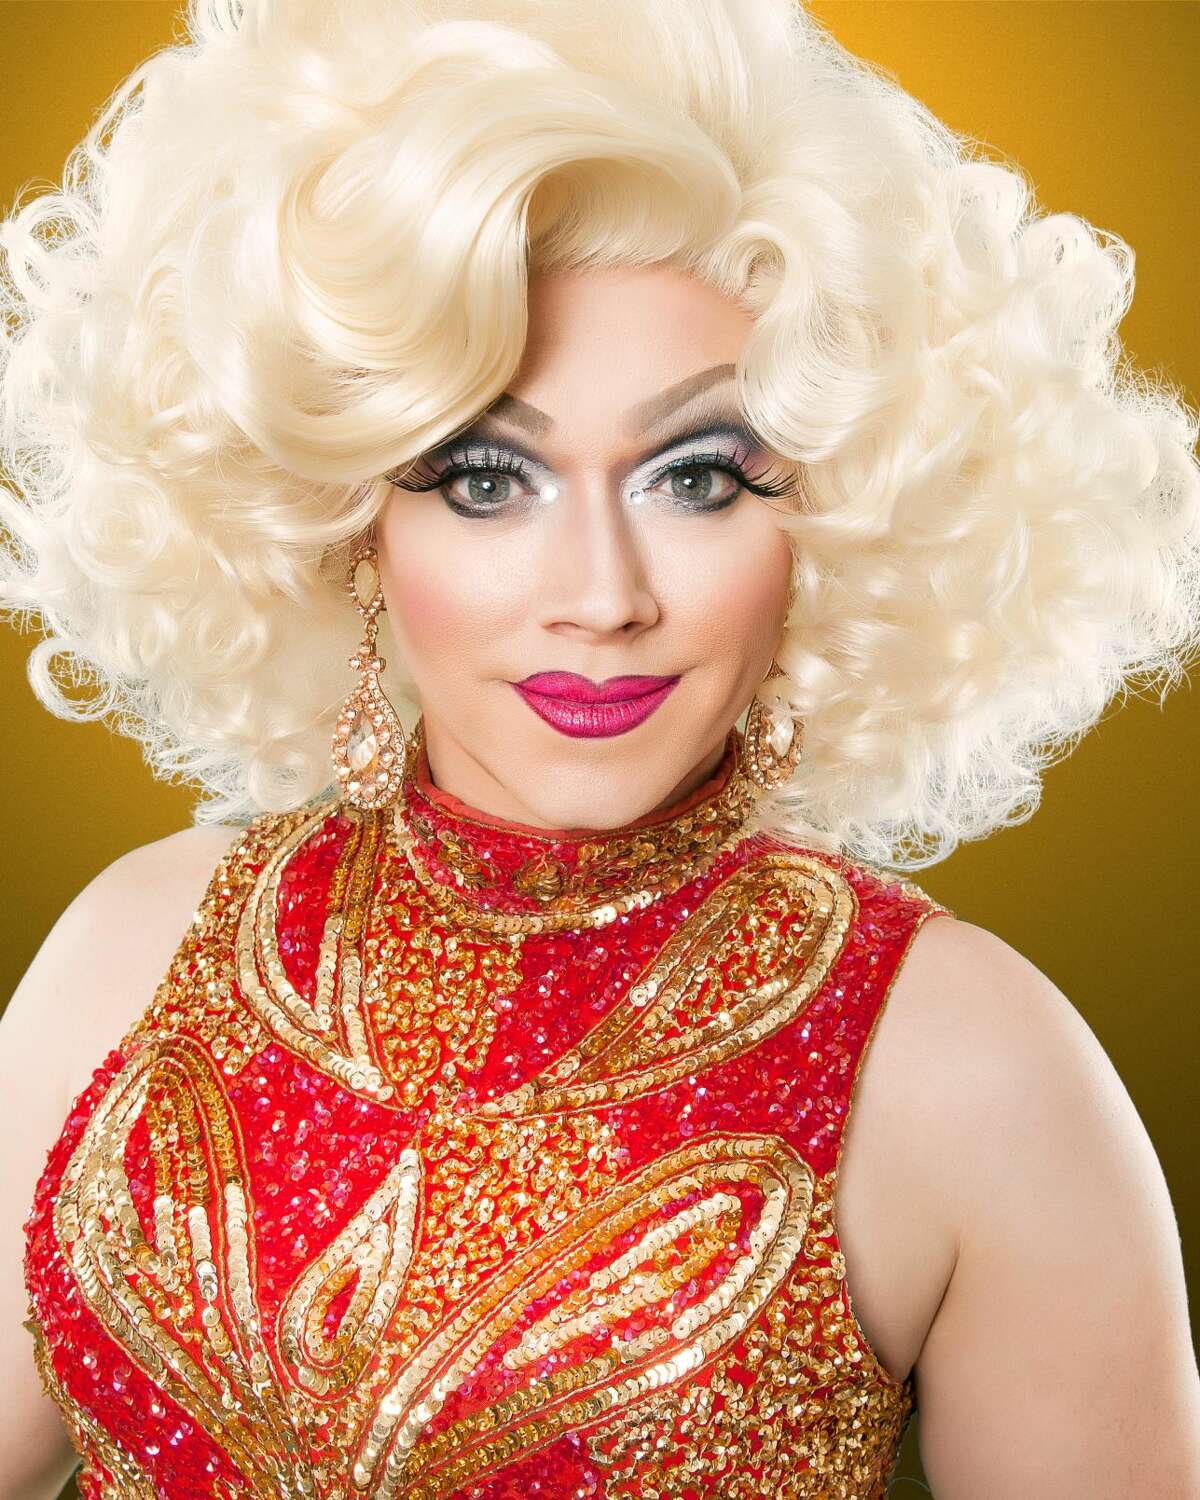 Paige Turner will star in ?“Drag Me To The Top!?” at 8 p.m. May 12  at The Milford Arts Center, 40 Railroad Ave., Milford.